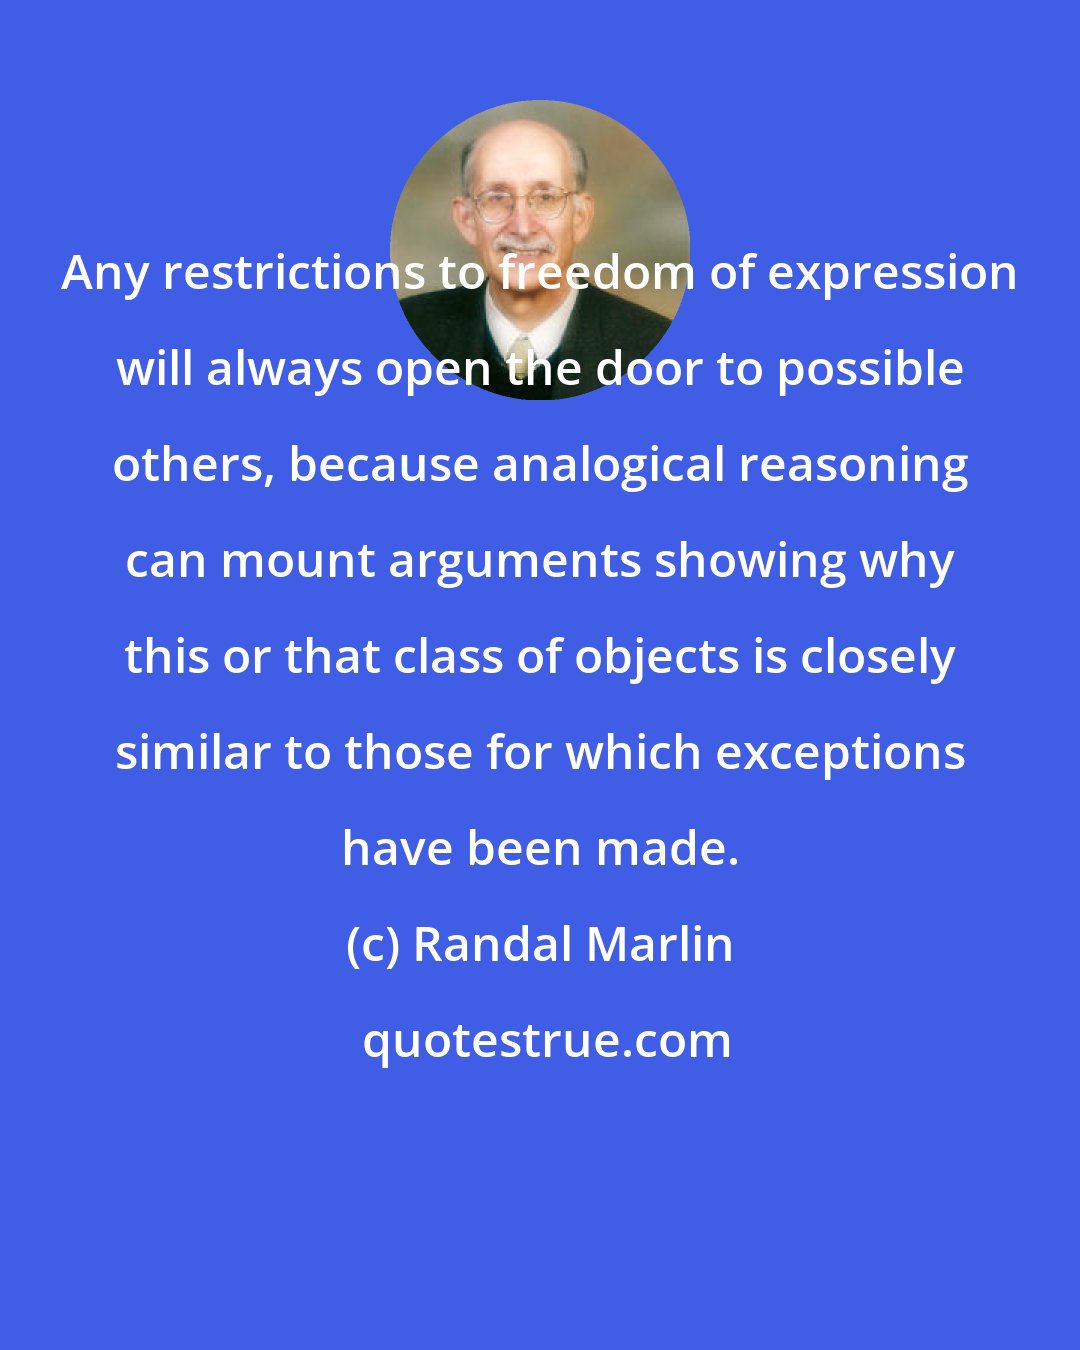 Randal Marlin: Any restrictions to freedom of expression will always open the door to possible others, because analogical reasoning can mount arguments showing why this or that class of objects is closely similar to those for which exceptions have been made.